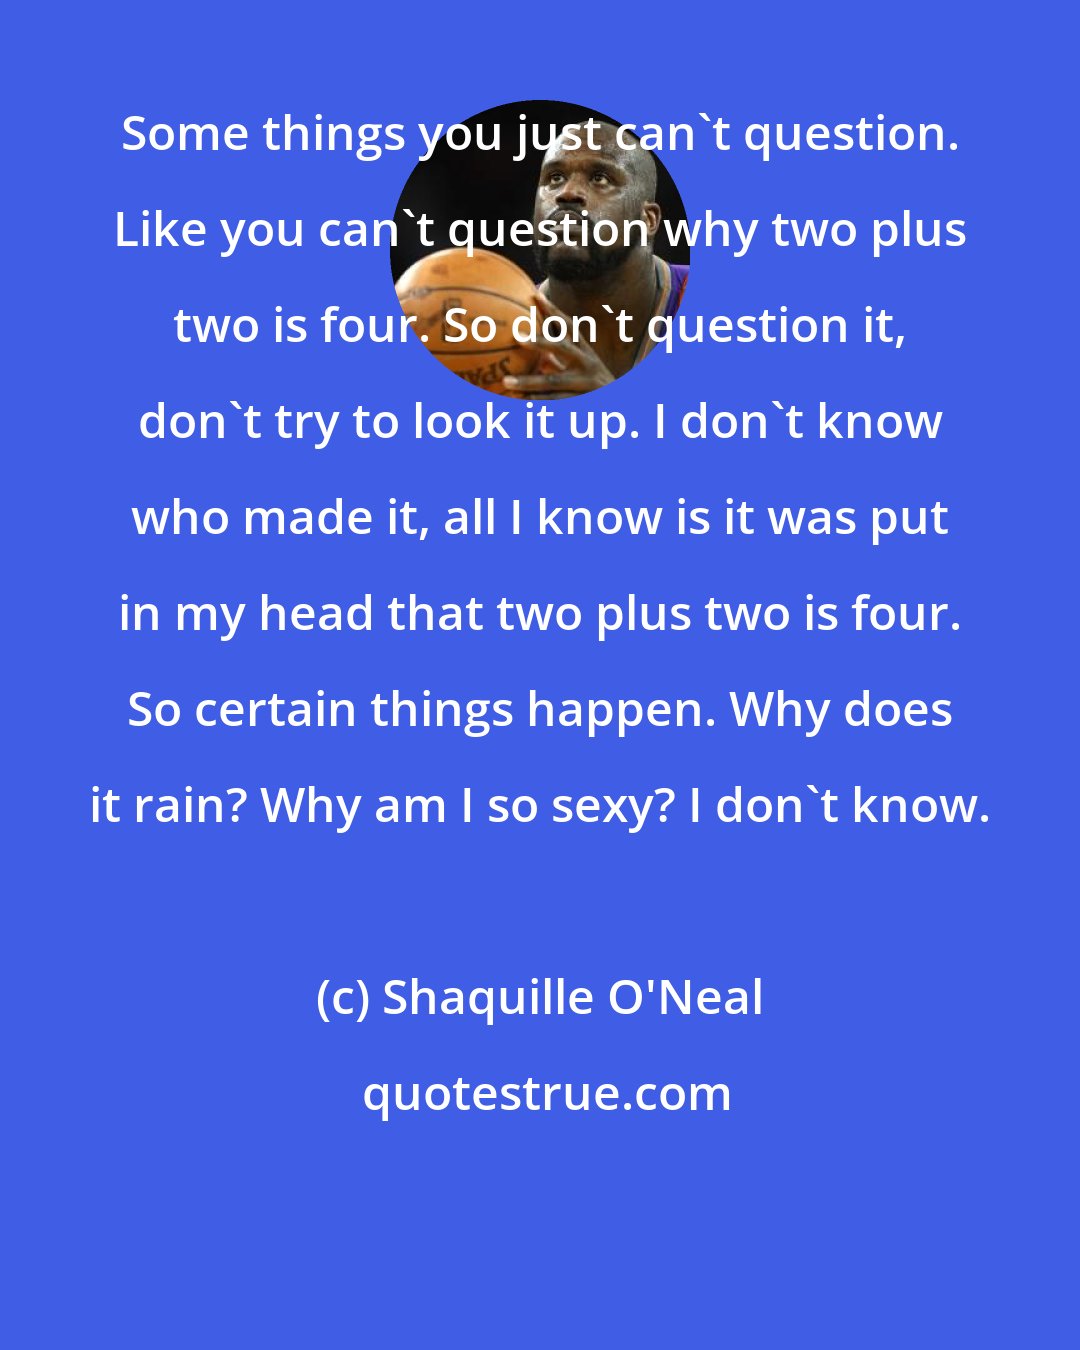 Shaquille O'Neal: Some things you just can't question. Like you can't question why two plus two is four. So don't question it, don't try to look it up. I don't know who made it, all I know is it was put in my head that two plus two is four. So certain things happen. Why does it rain? Why am I so sexy? I don't know.